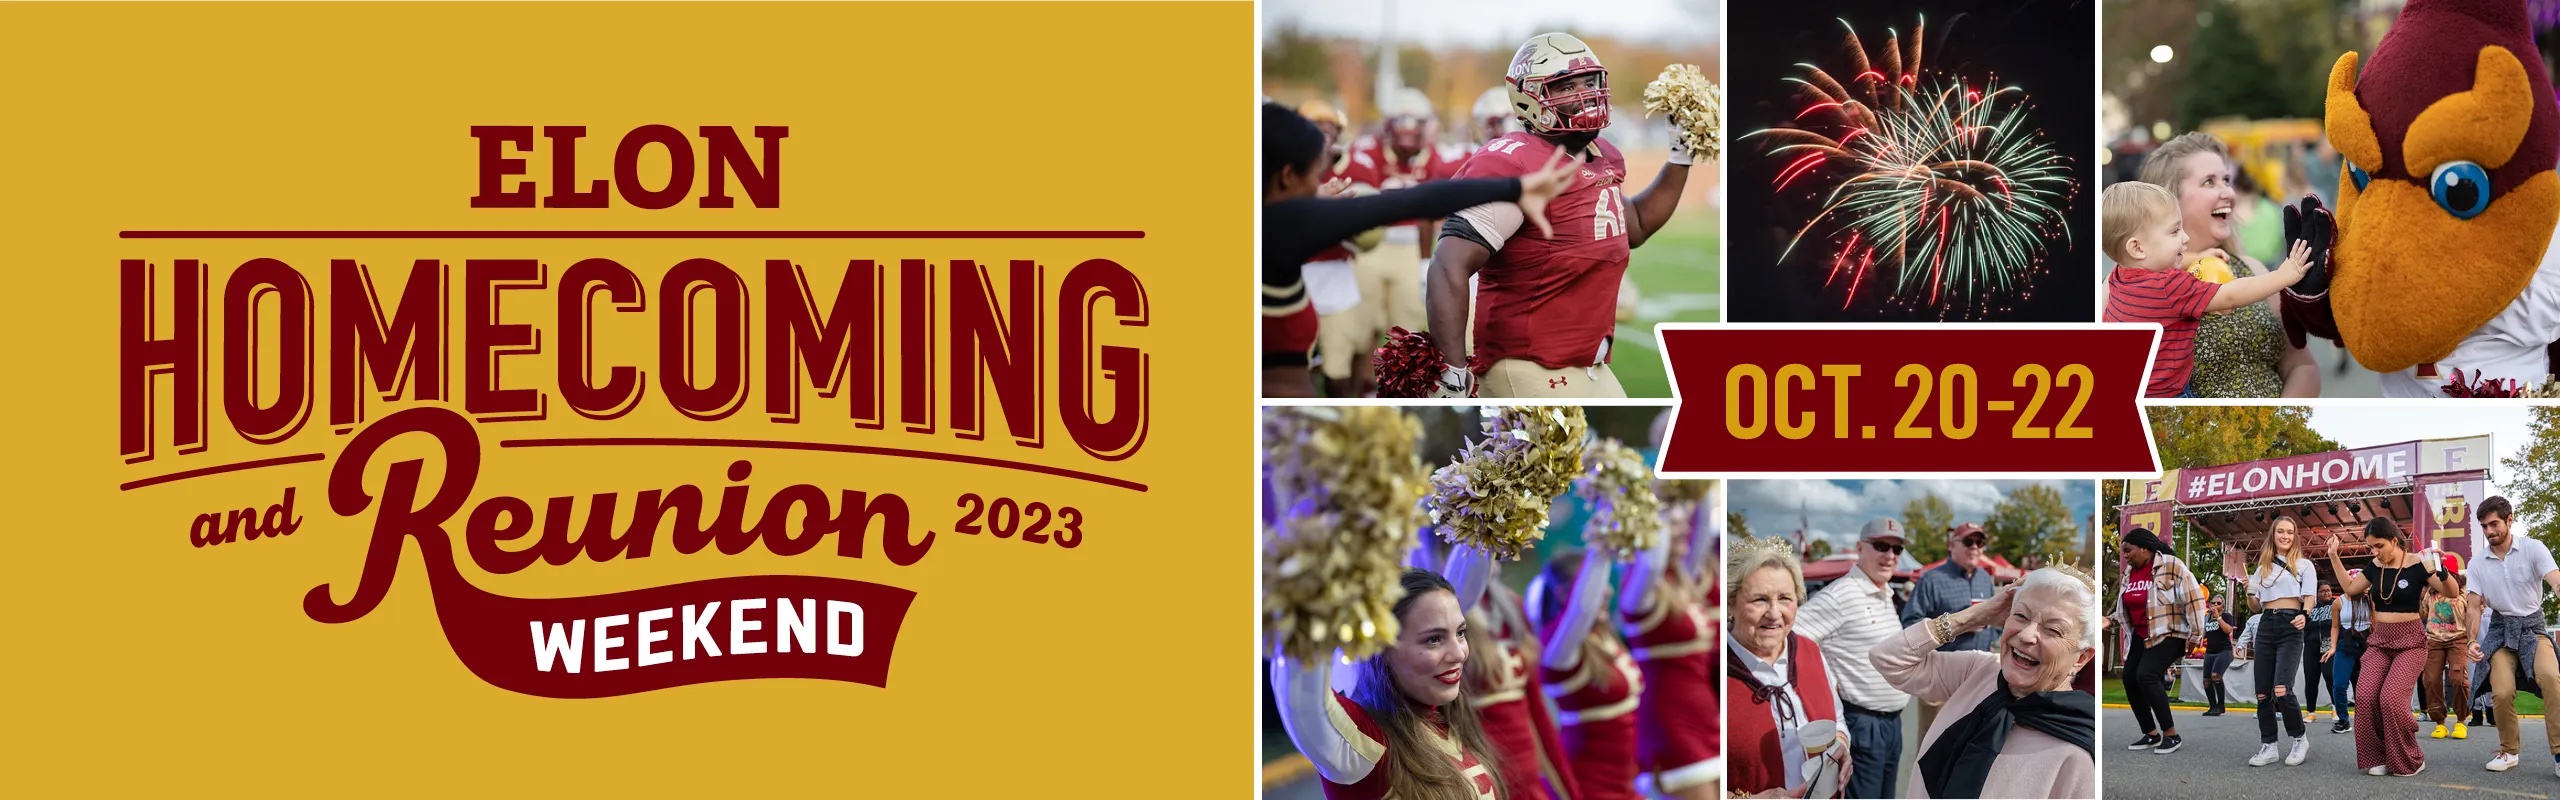 2023 Homecoming & Reunion Weekend graphic banner